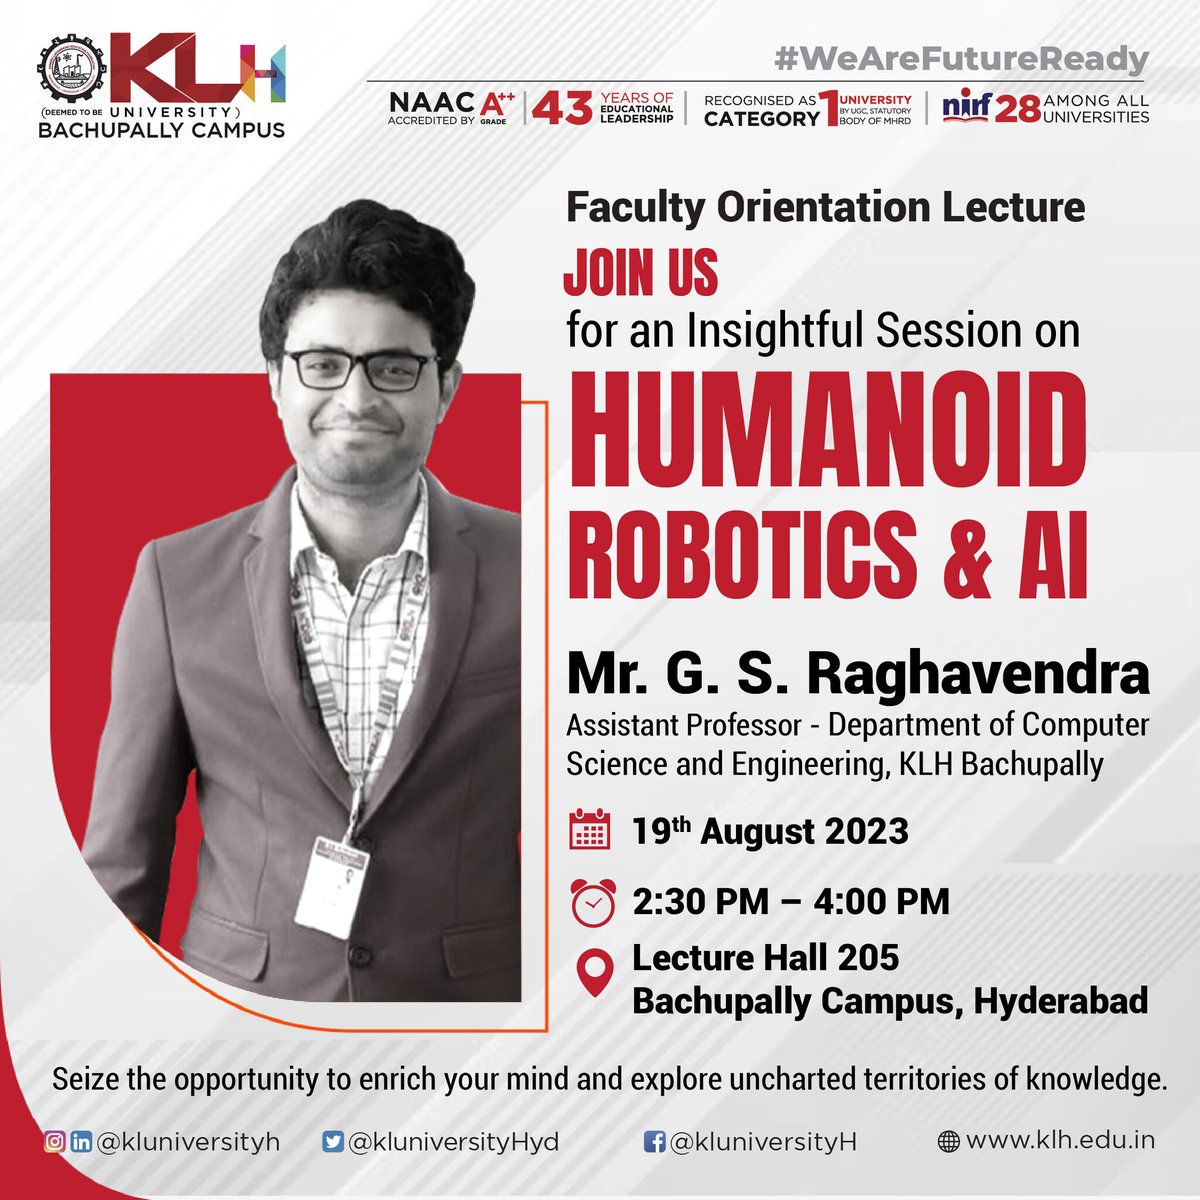 Don't miss this offline opportunity to expand your horizons and stay up-to-date with cutting-edge technology.

Apply Now: klh.edu.in/admissions/

#KLuniversity #KLH #Placements #Scholarships #Congratrulations #FacultyOrientationProgram #HumanoidRobotics #ArtificialIntelligence